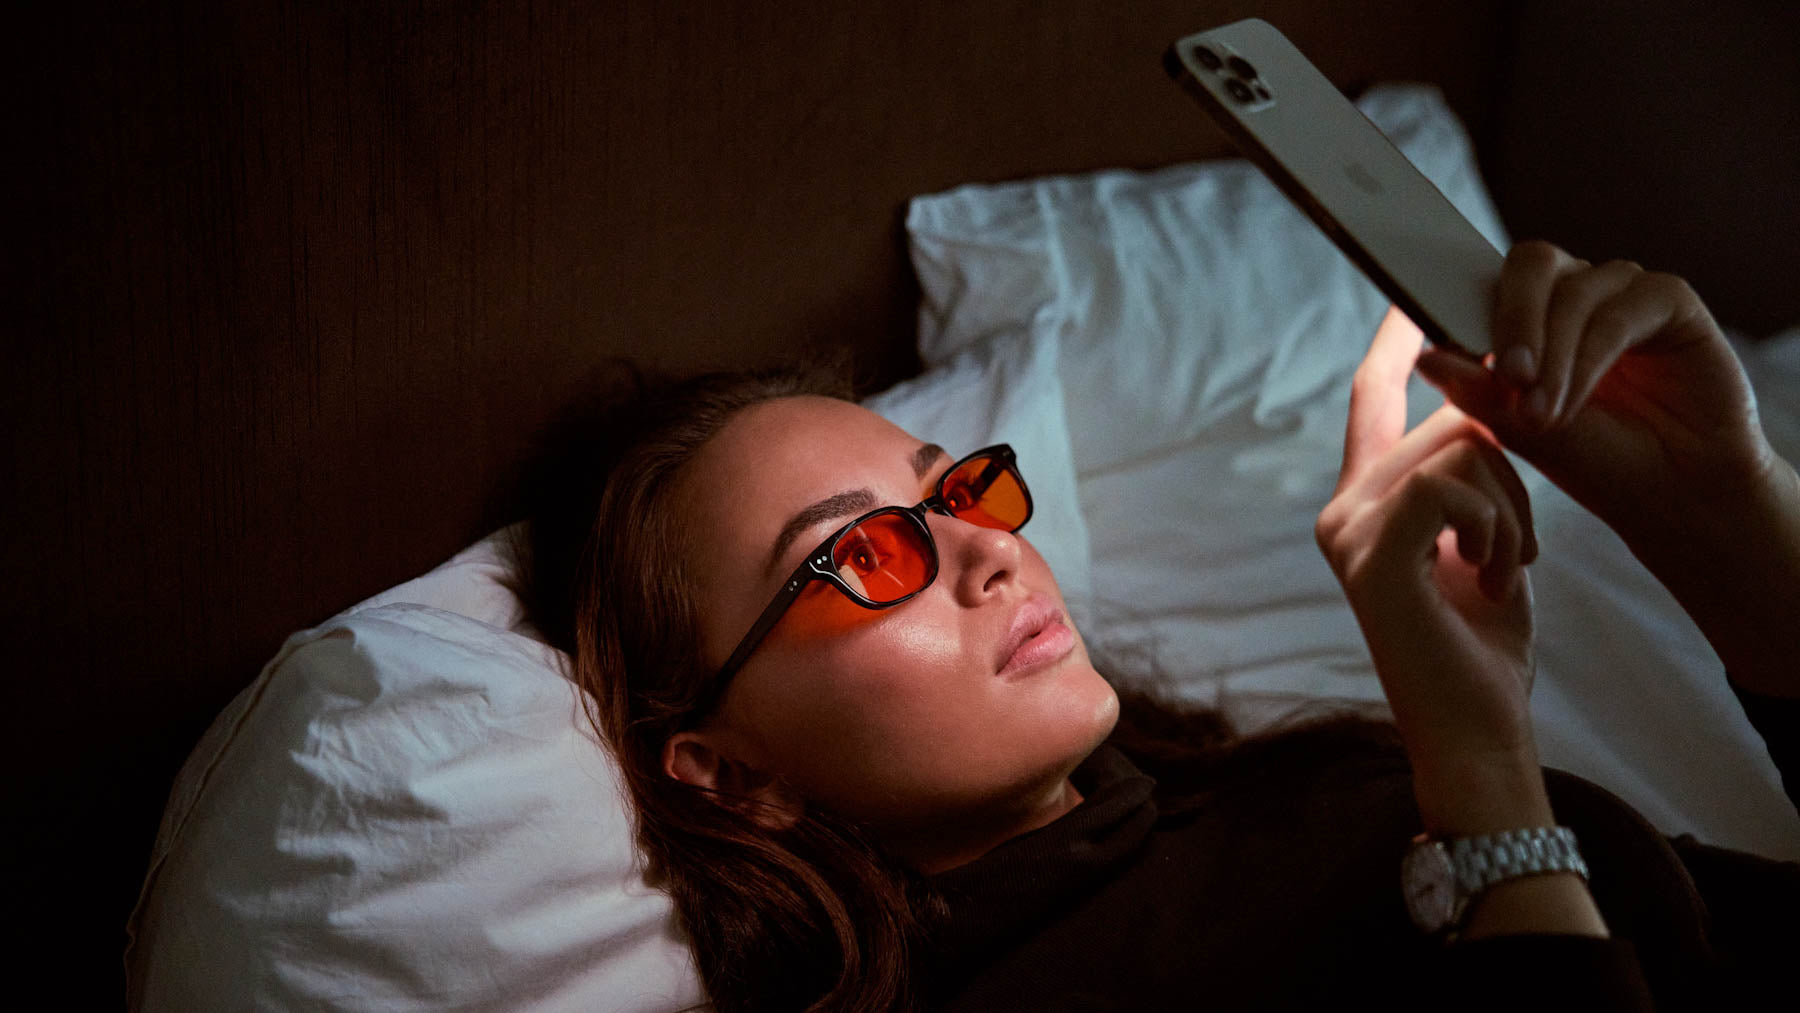 Filter Optix blue light glasses block artificial blue light from screens to improve your melatonin production and sleep